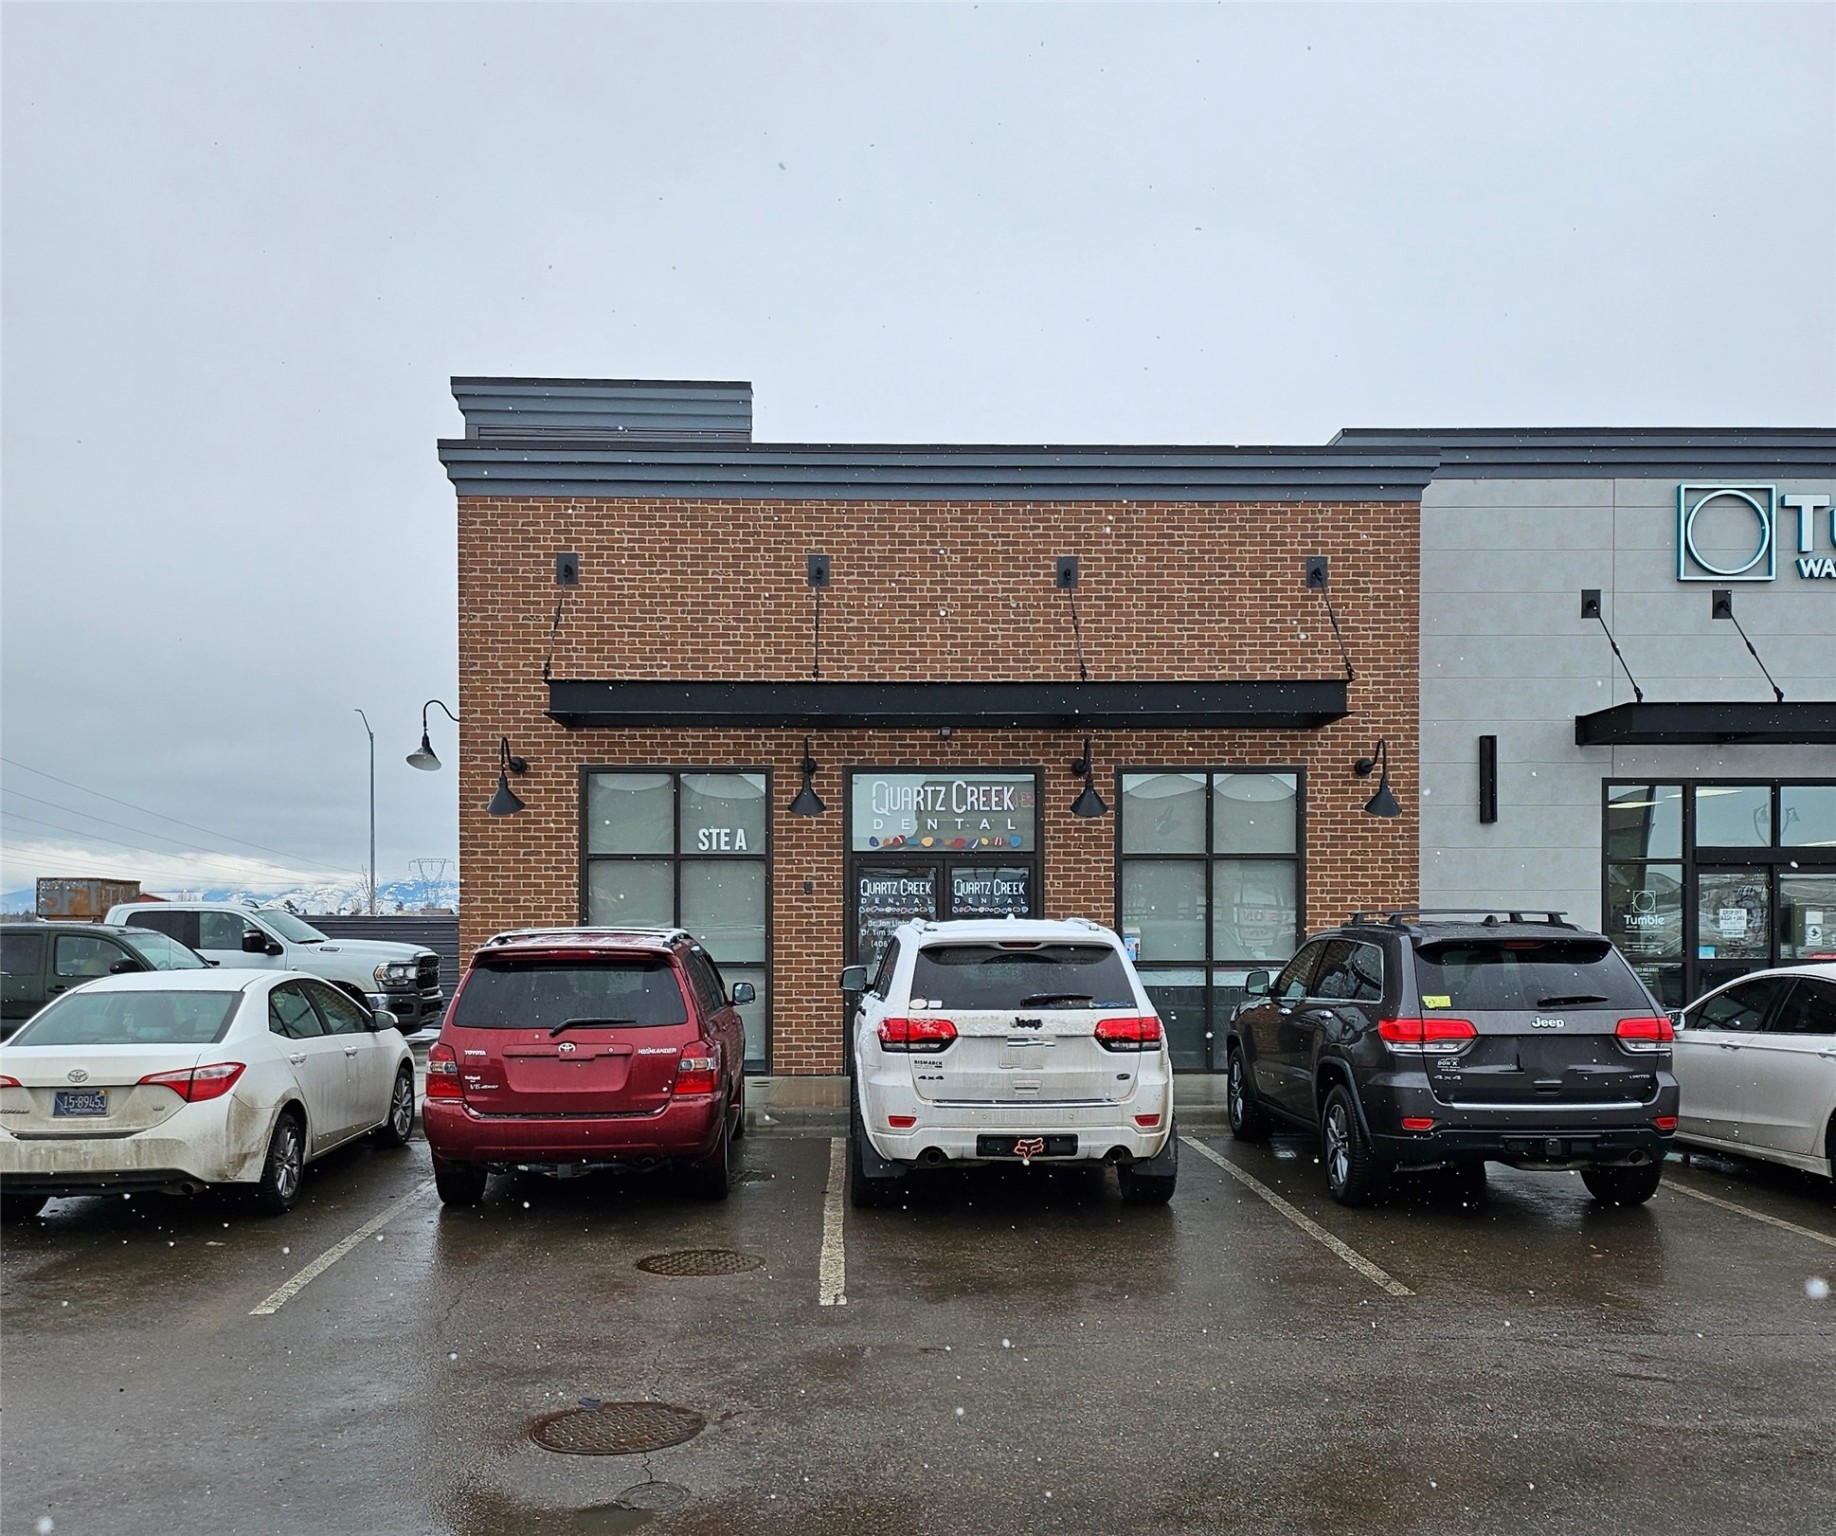 1774 sq ft office available for lease in one of Kalispell's newest business parks! Amazing location! Easy ingress and egress. Great mixture of businesses. Currently a dentist office. Zoned B5 PUD. Available September 1, 2024.